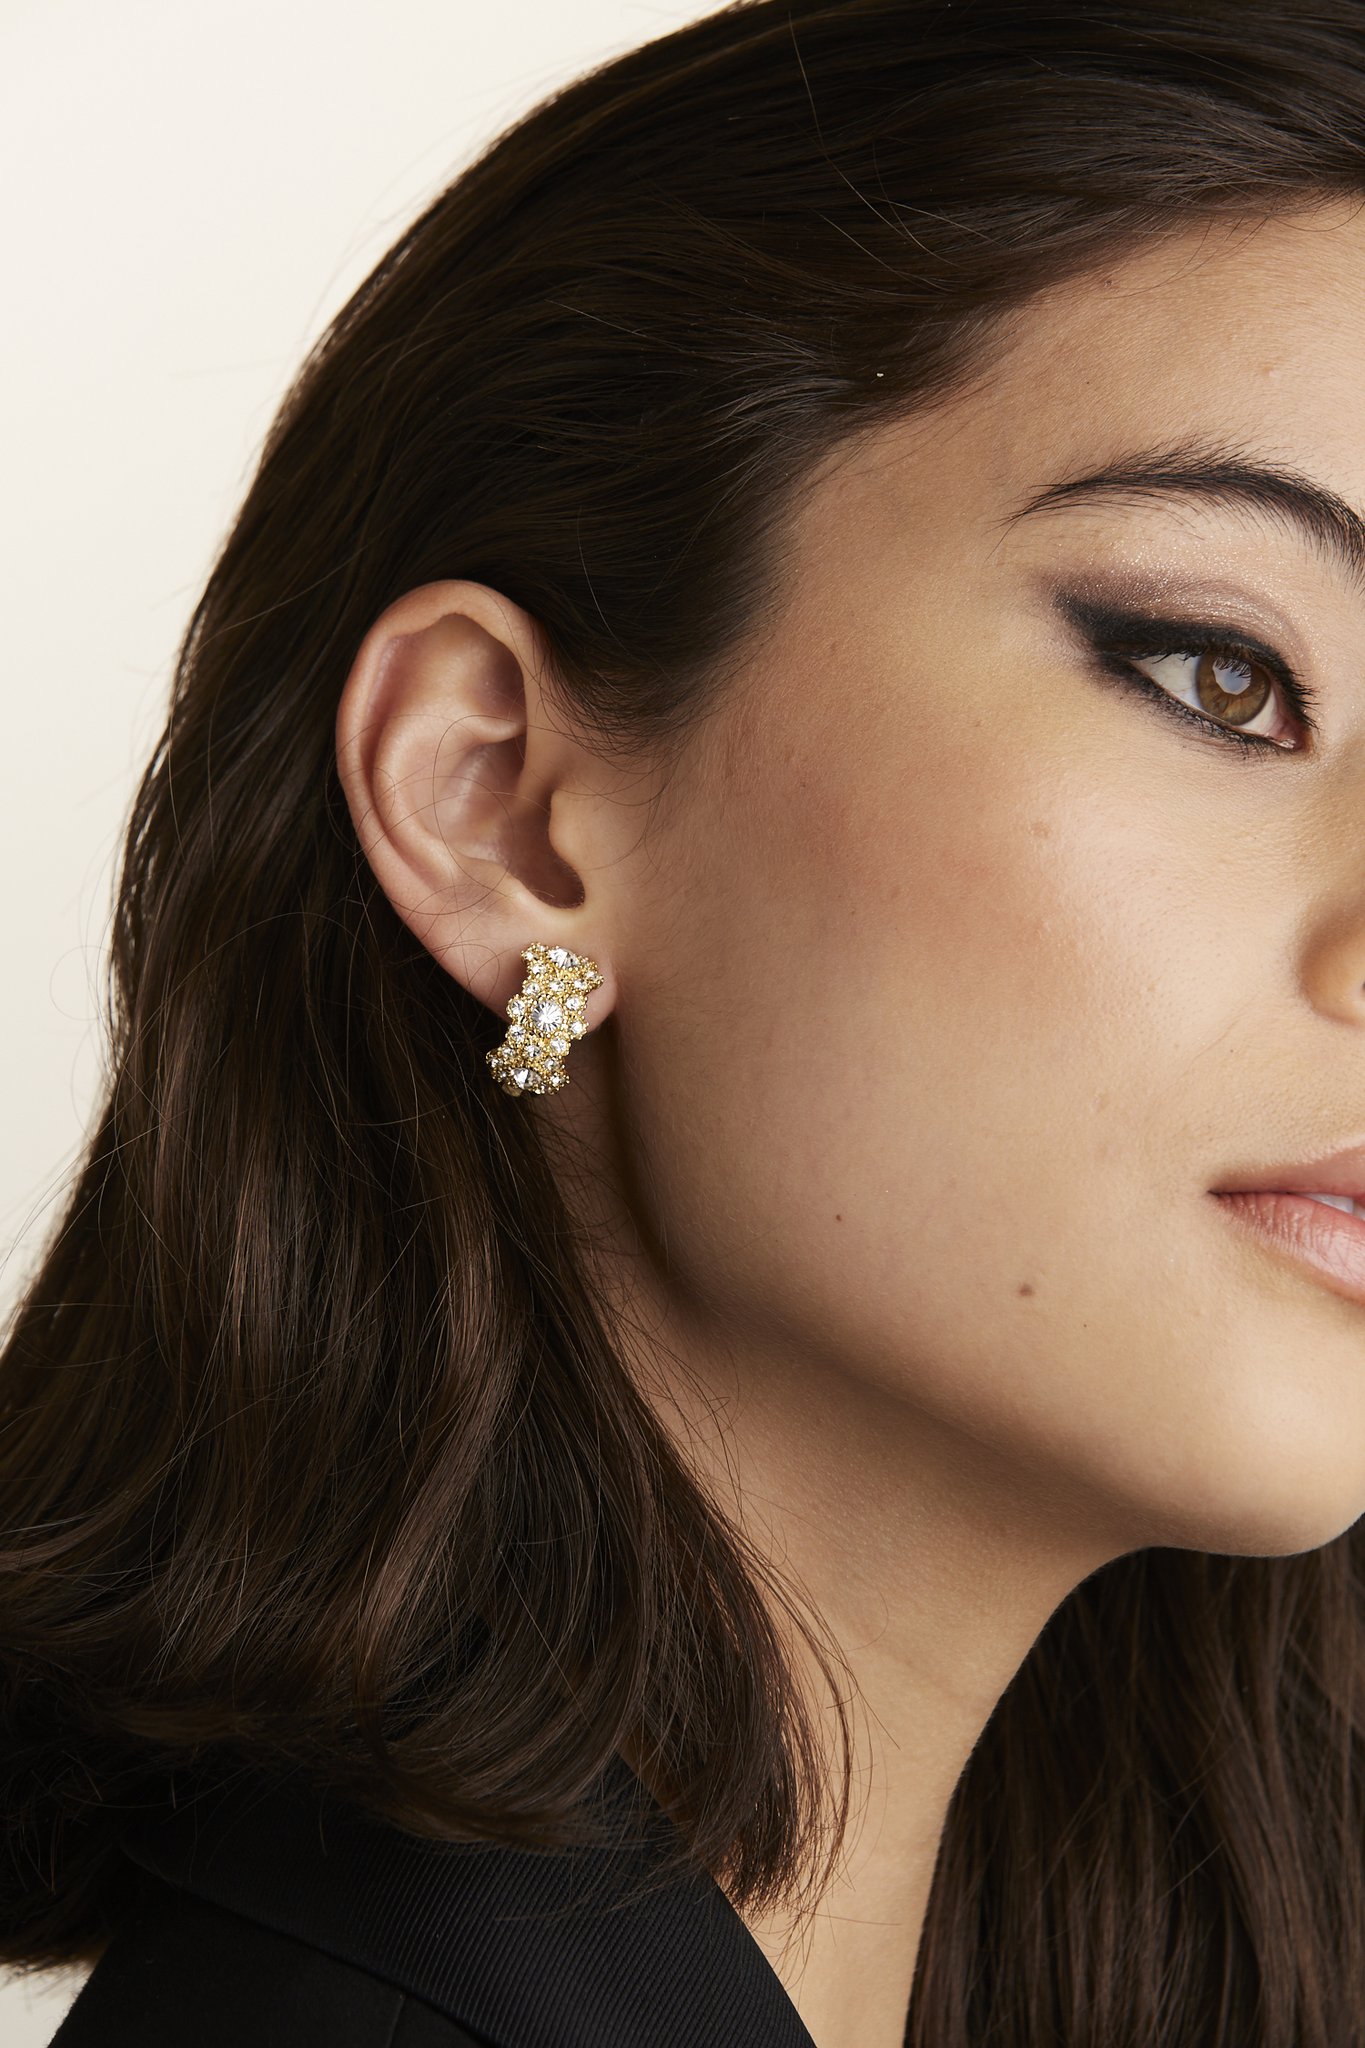 Hadid Vintage Earrings, $299 from Love and Object